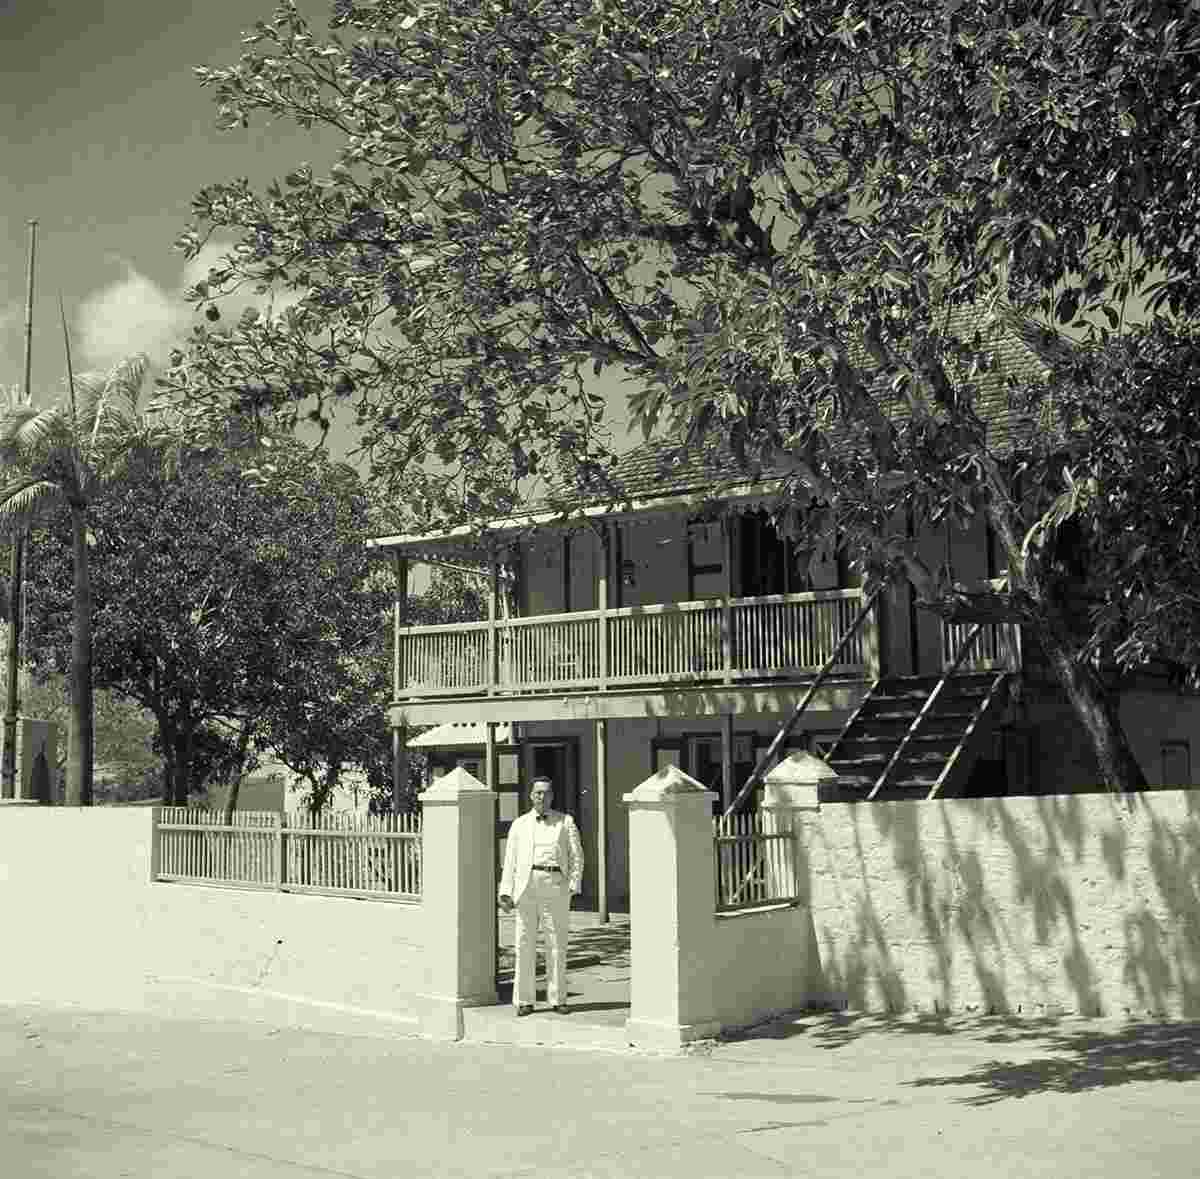 Oranjestad. Mr Voges in front of the government guest house, 1947